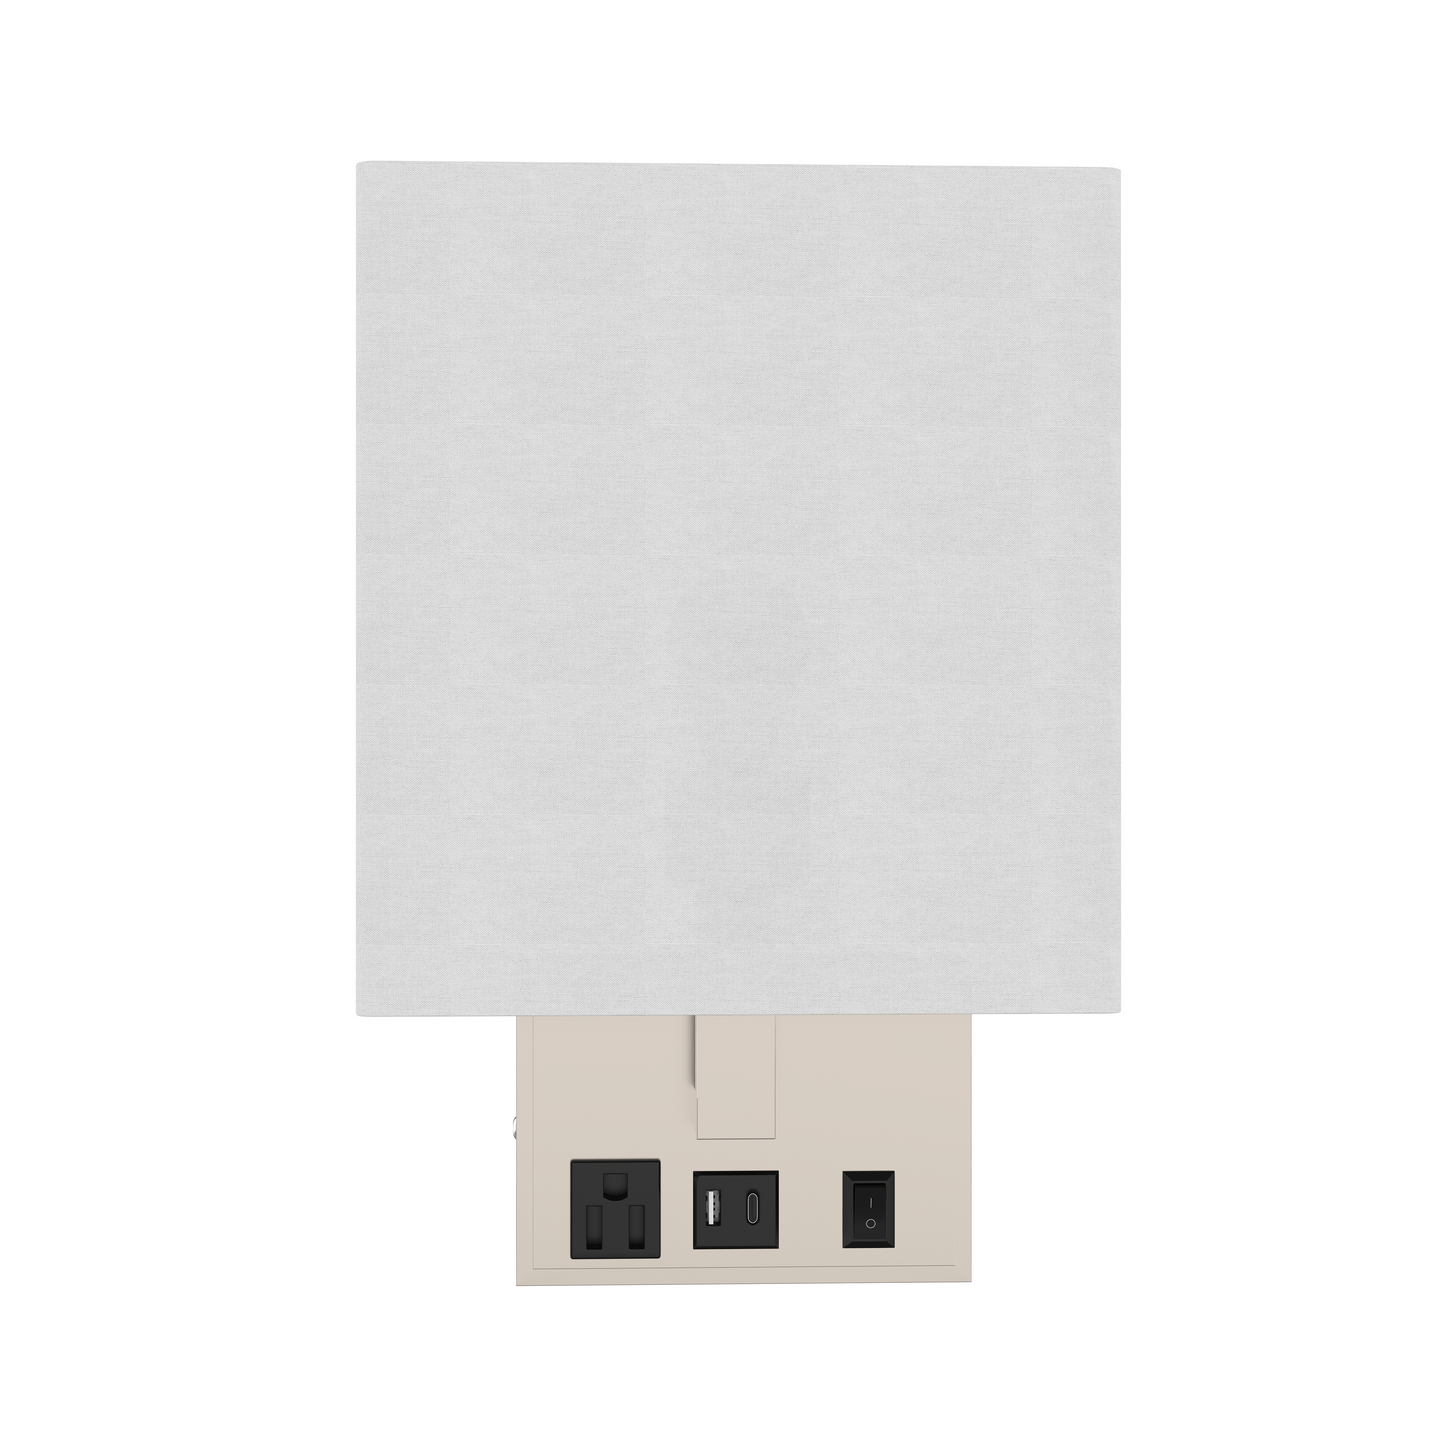 1-Light, Decorative Wall Sconces Light with 1 Switch, 1 USB, 1 Type C & 1 Outlet, Satin Nickel Finish w/ White shade, Wall Mounted Lamps for Home Hotel Corridor Restaurant